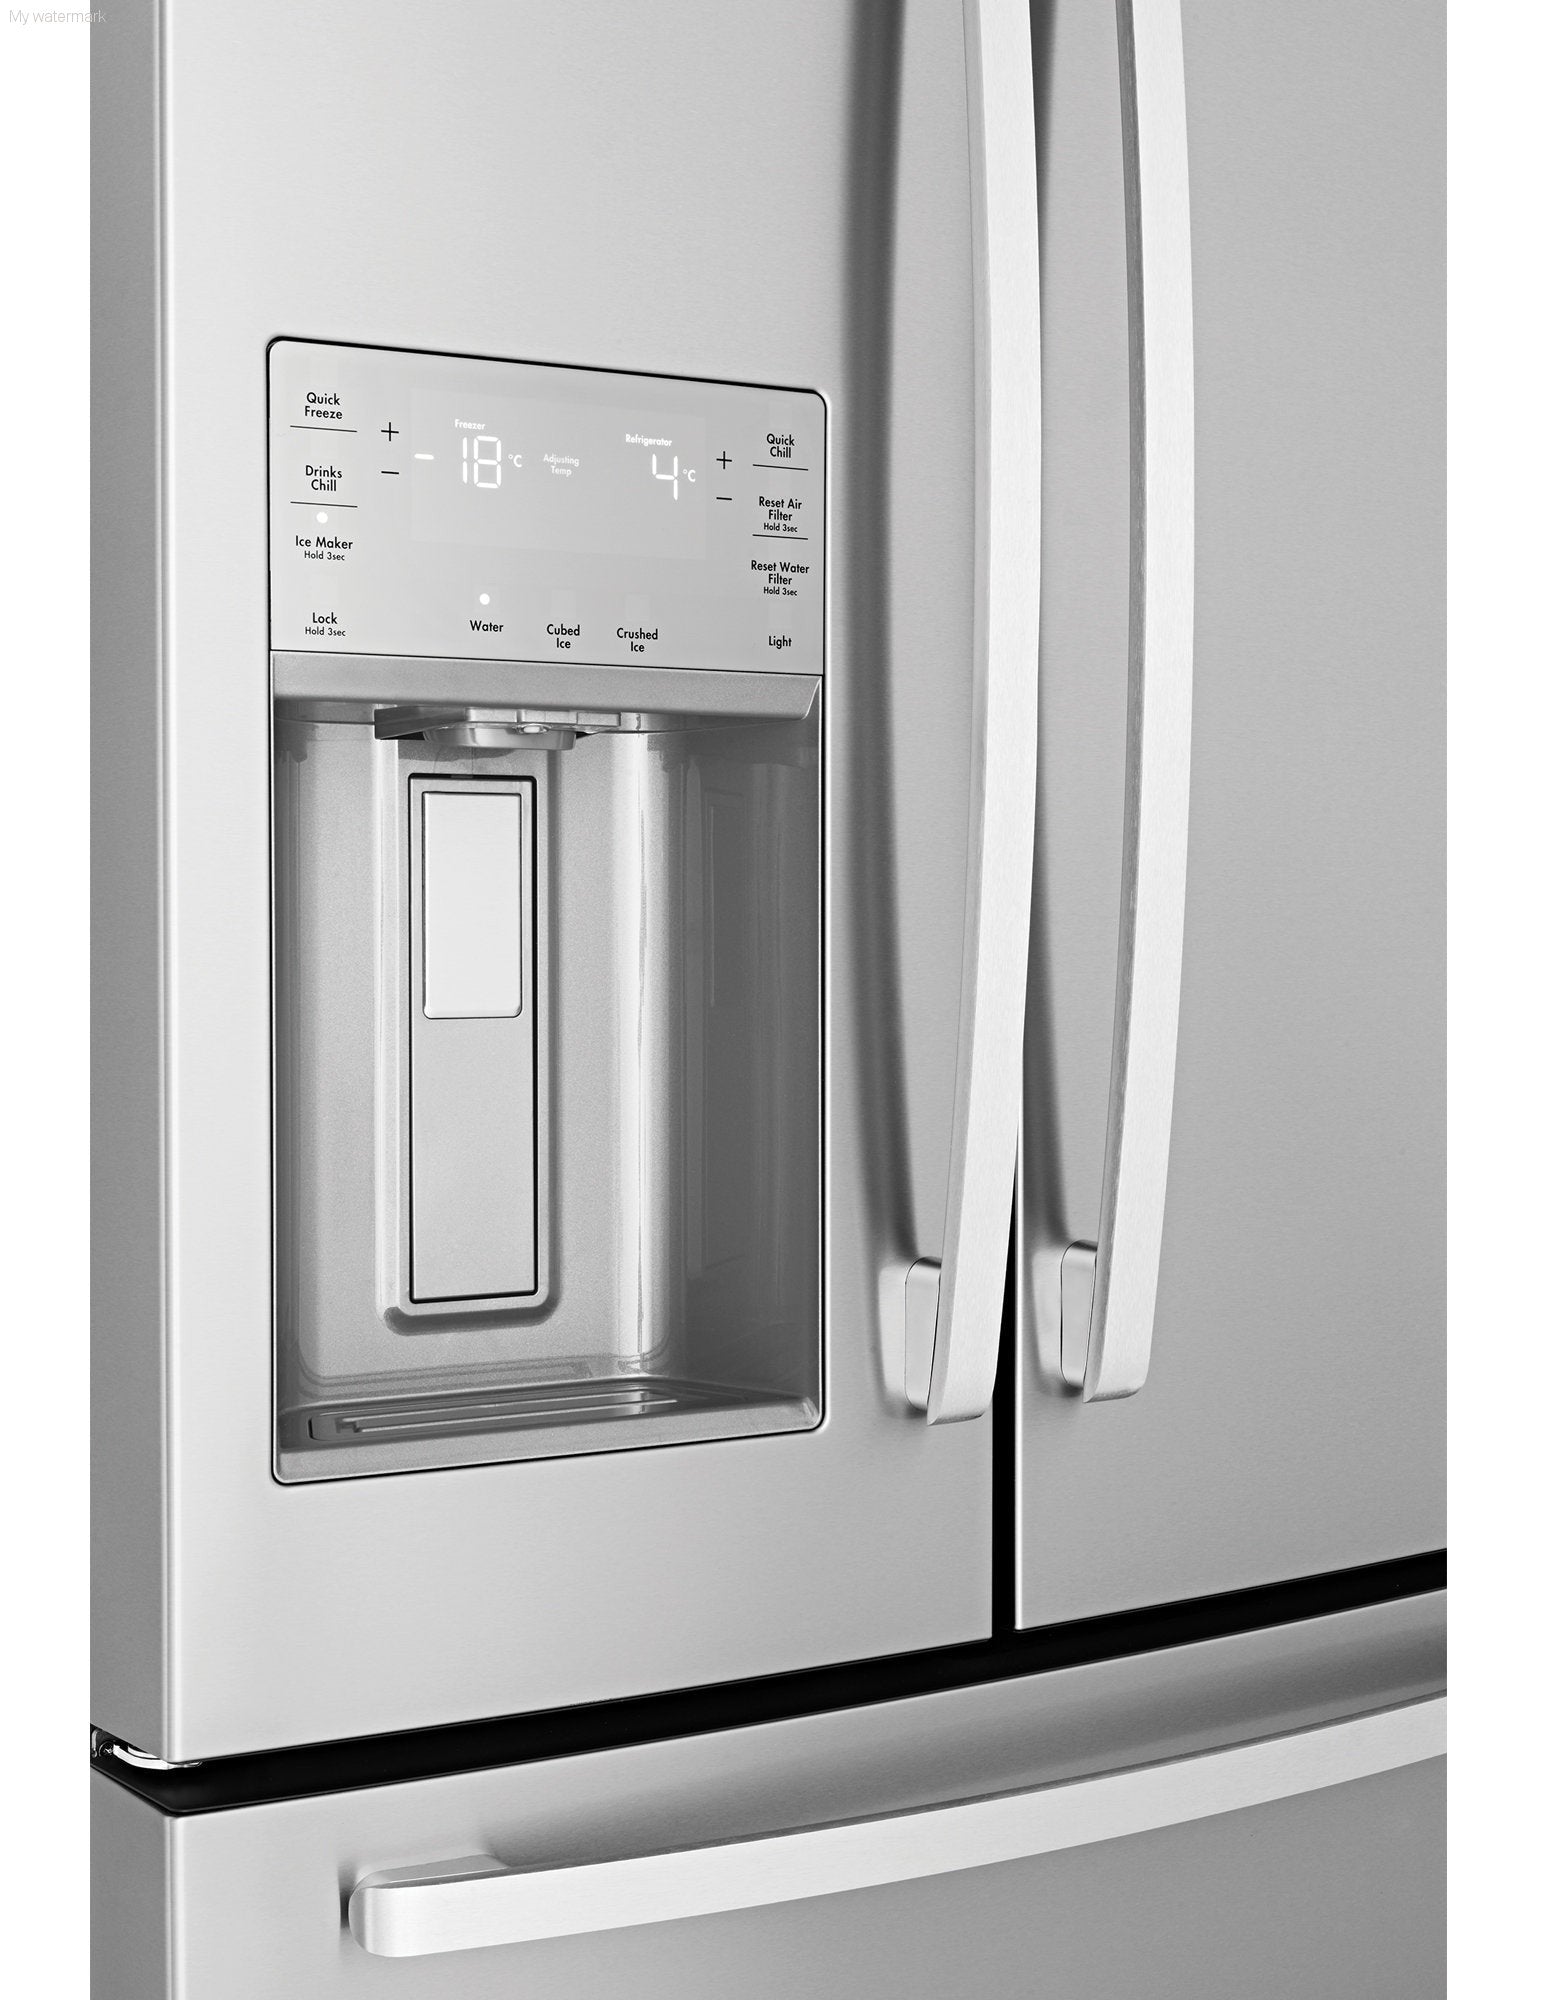 Westinghouse 619L French Door Fridge with Ice and Water